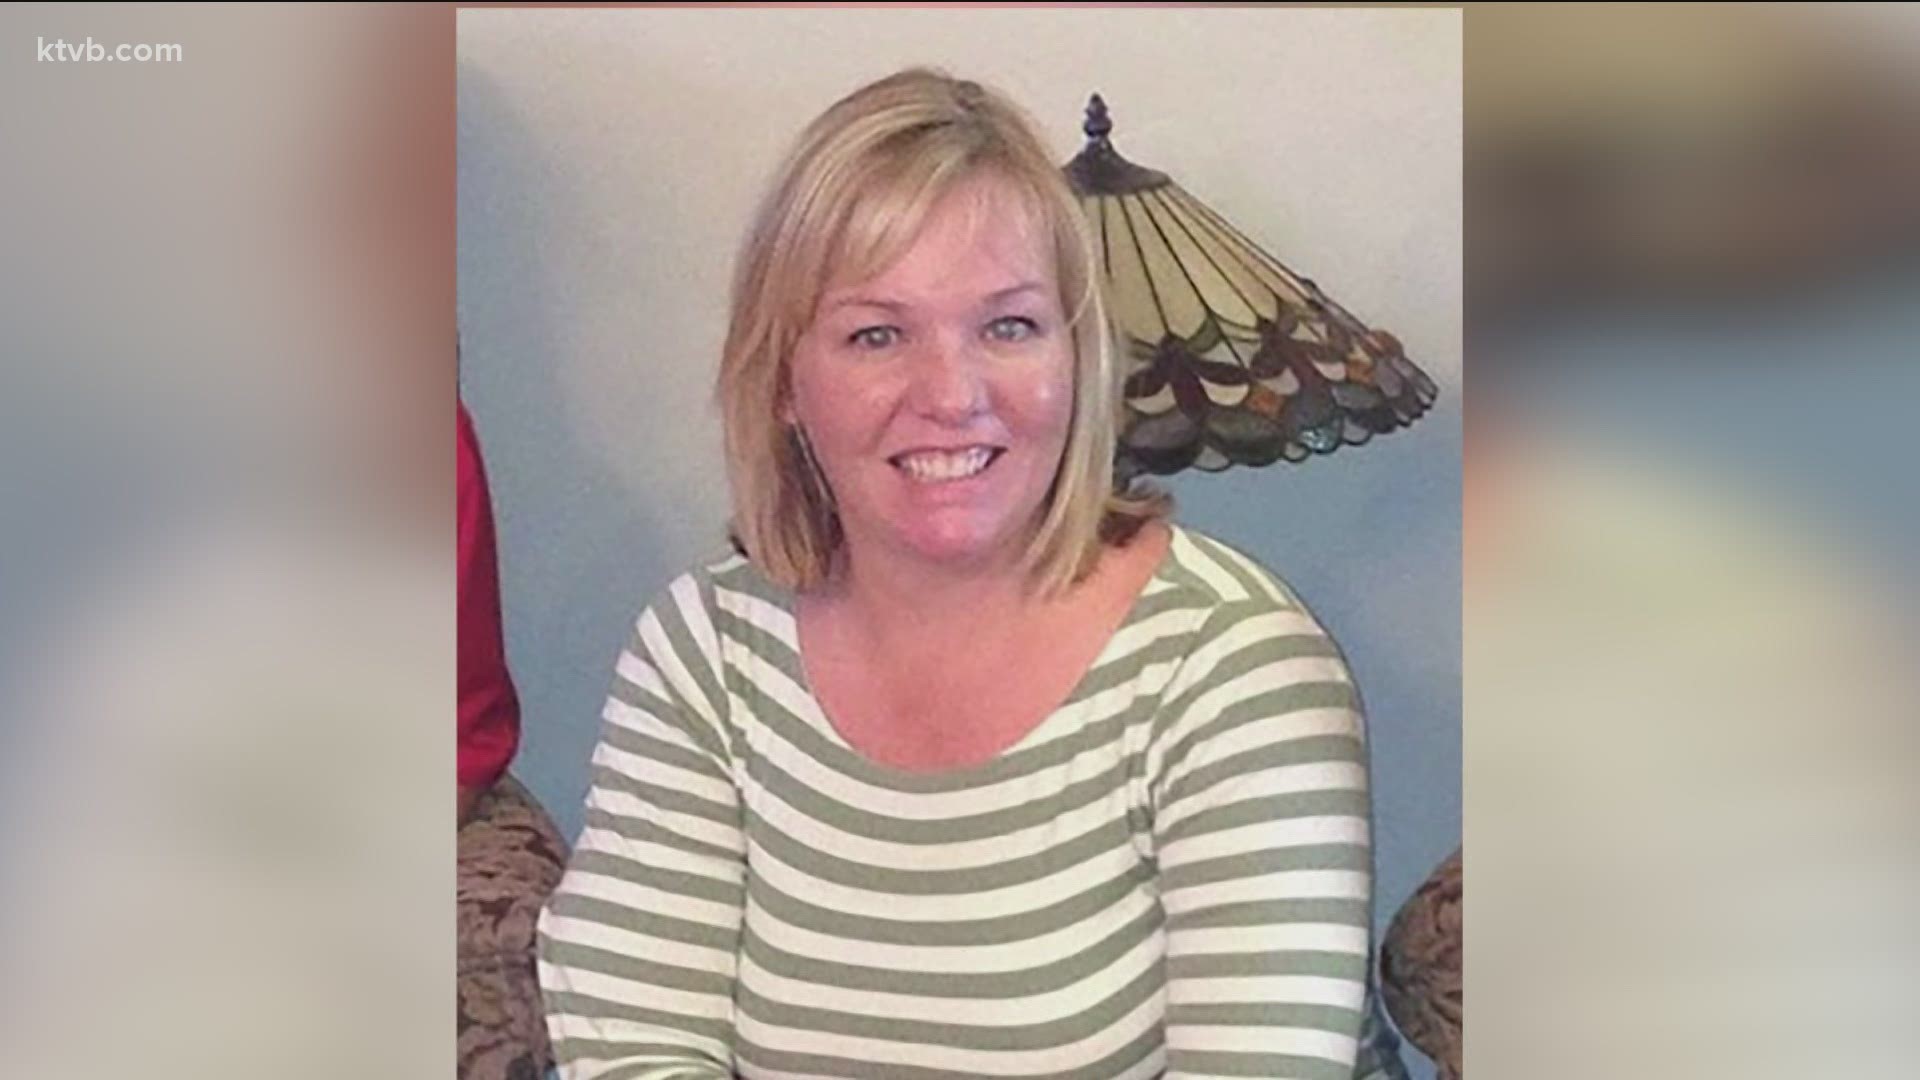 Caldwell nurse practitioner Samantha Hickey, 45, died of coronavirus in July, prompting her son to raise money for her St. Luke's memorial scholarship.